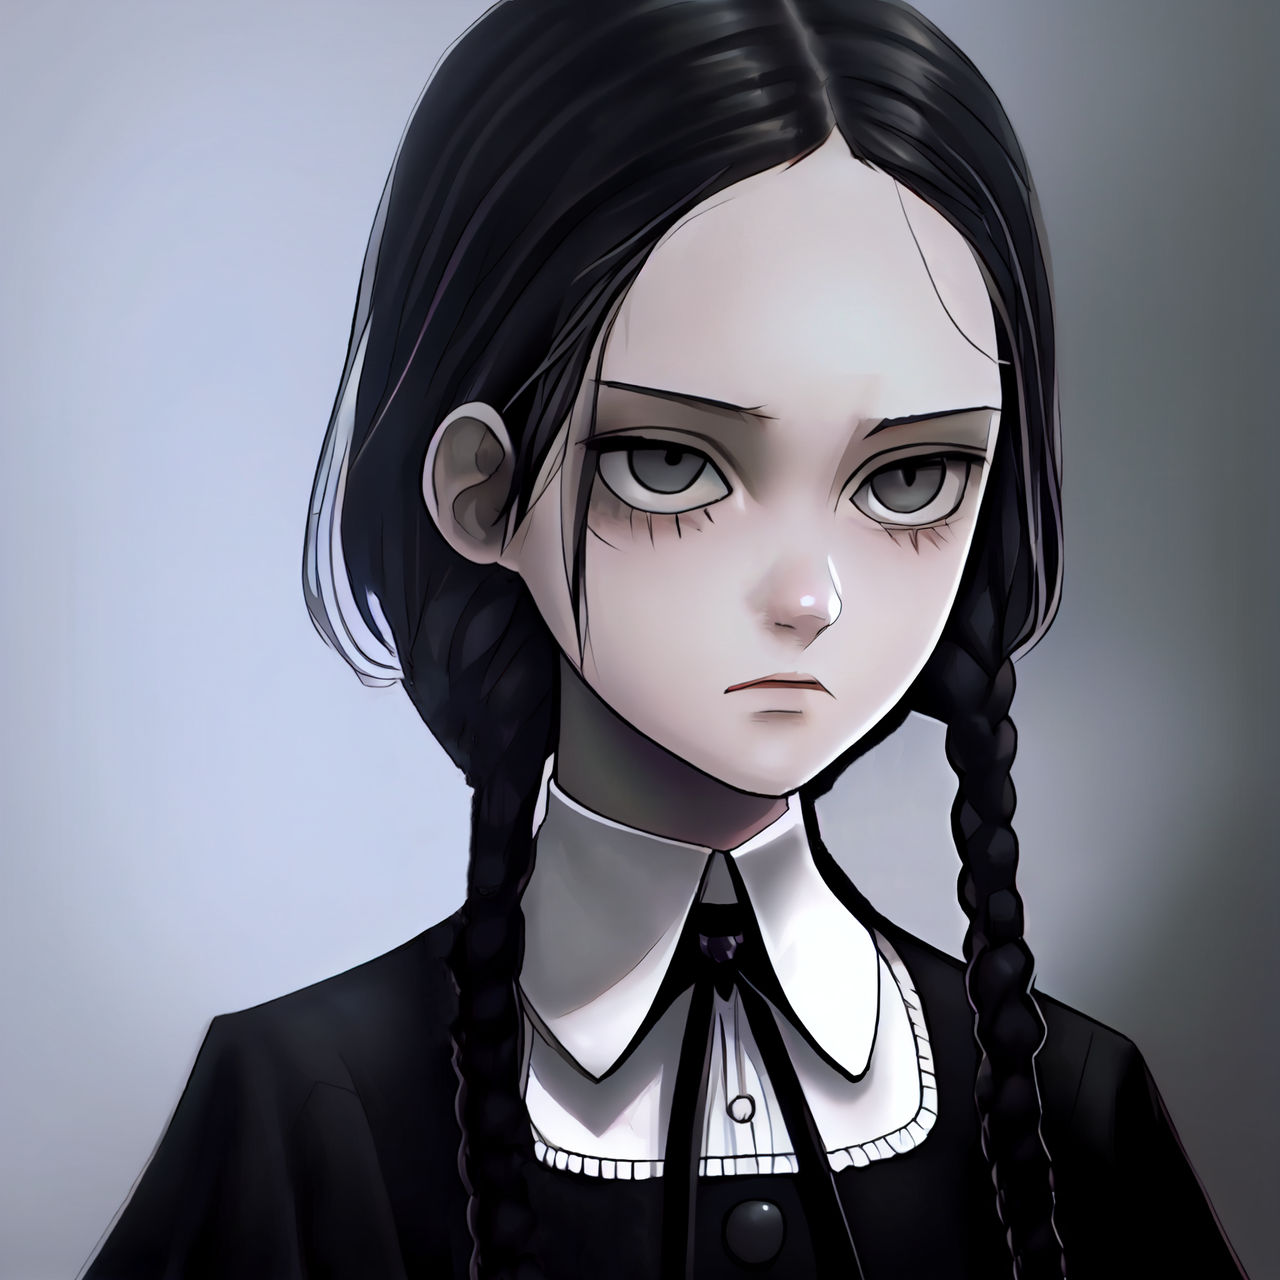 Wednesday Addams by BoneHedToons on DeviantArt